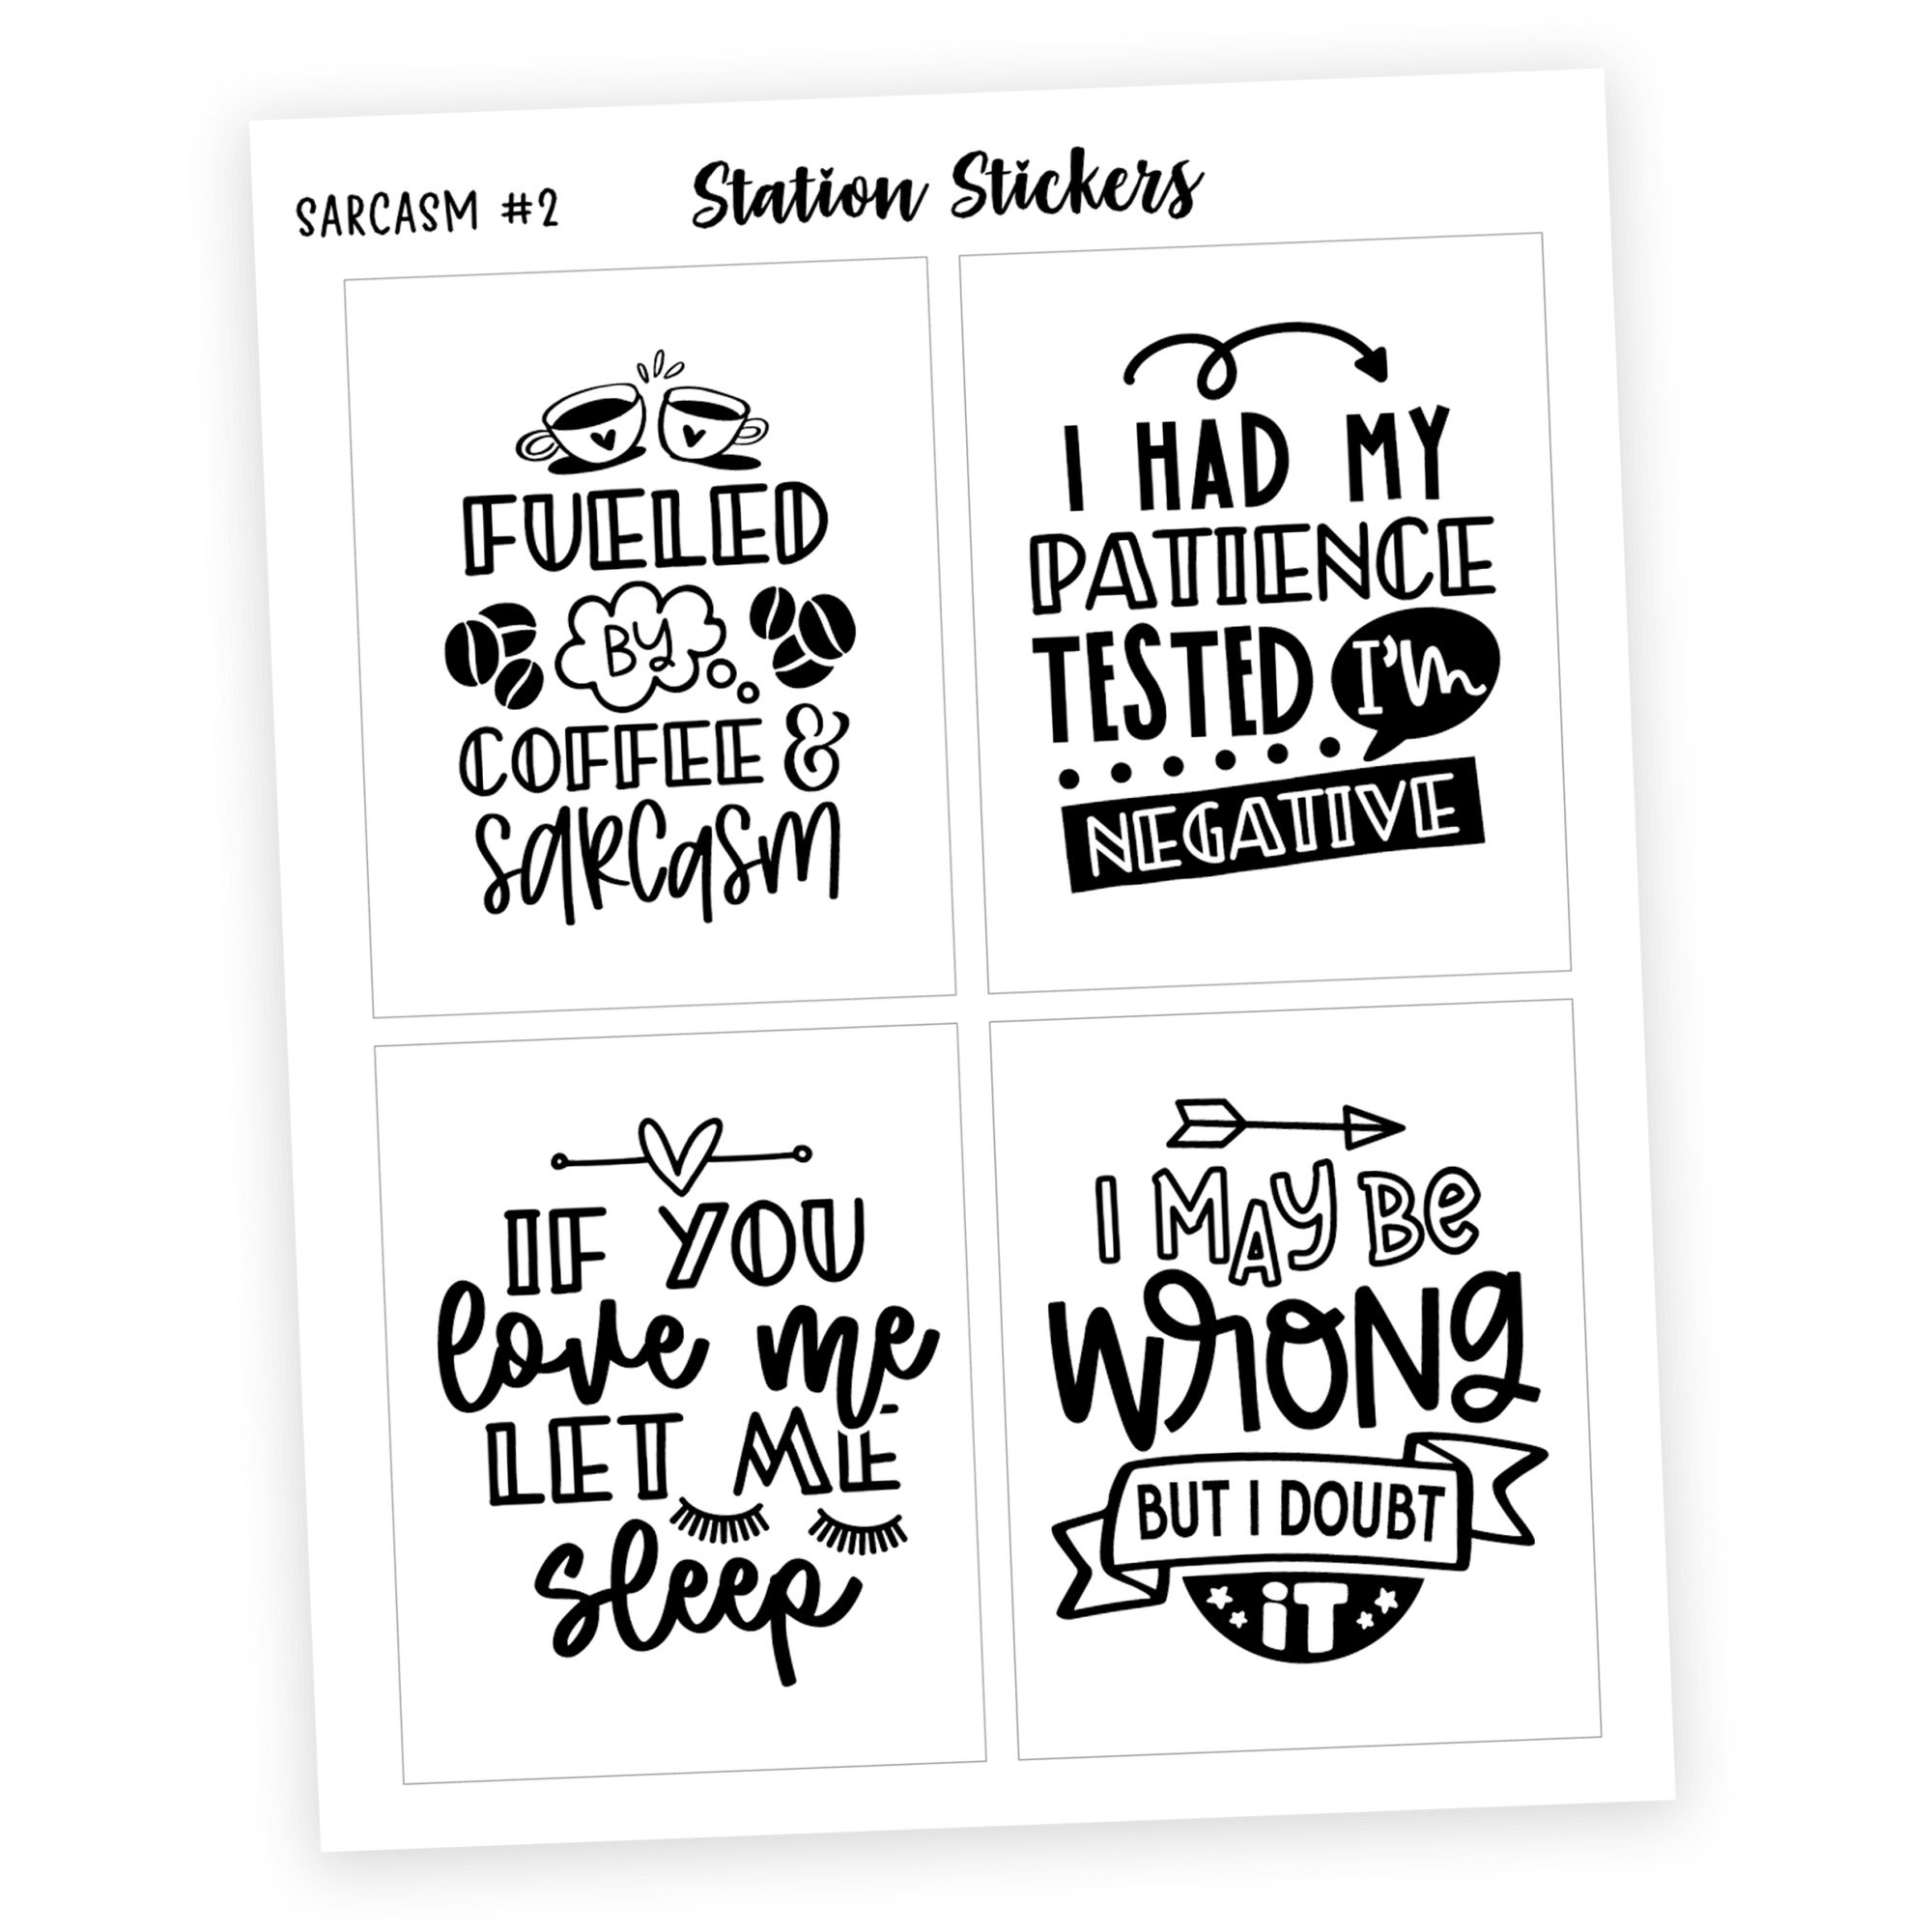 QUOTES • SARCASM 2 - Station Stickers